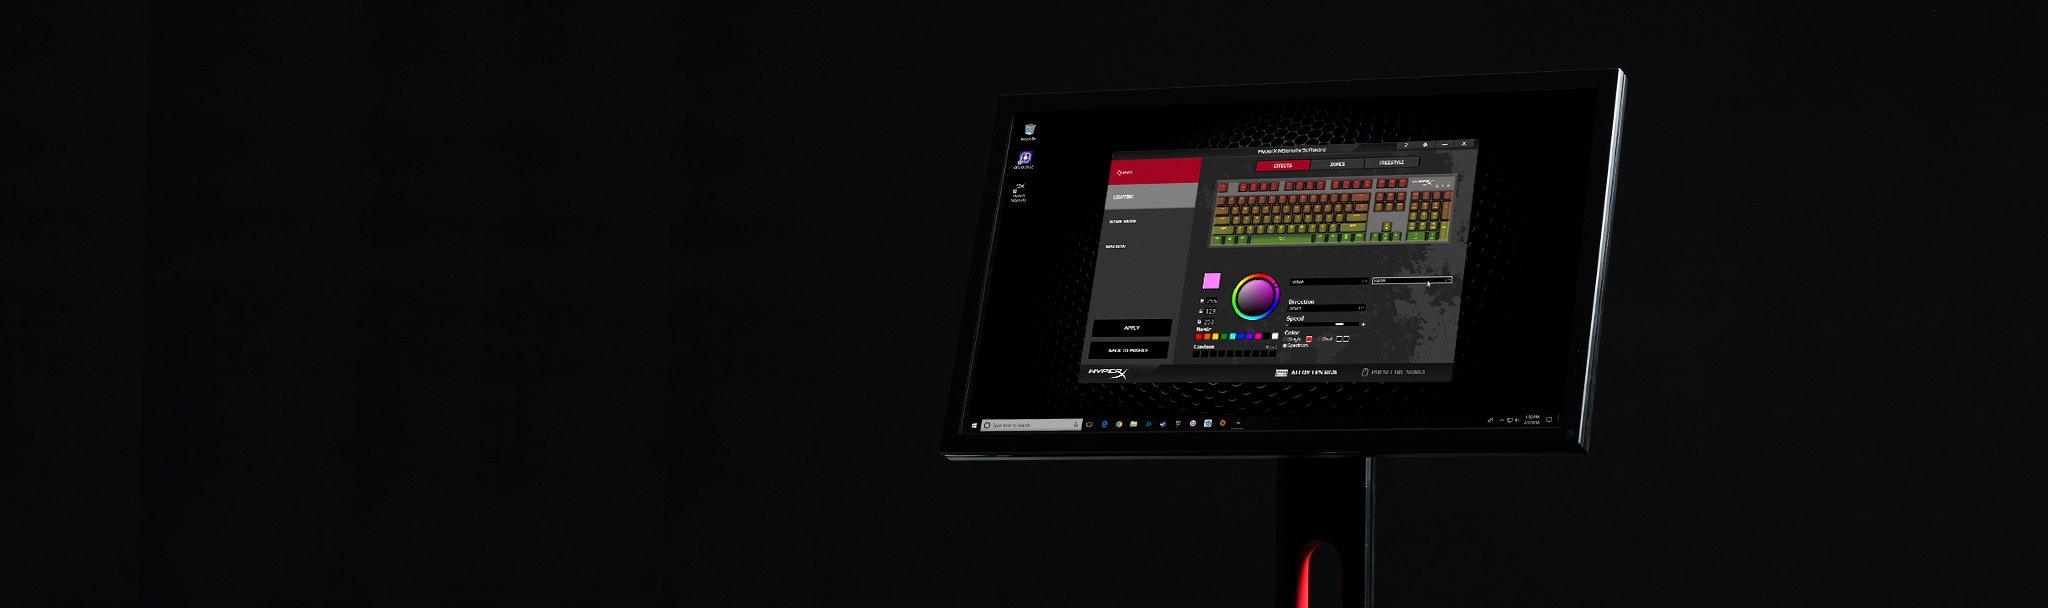 HyperX NGenuity software enables advanced customization